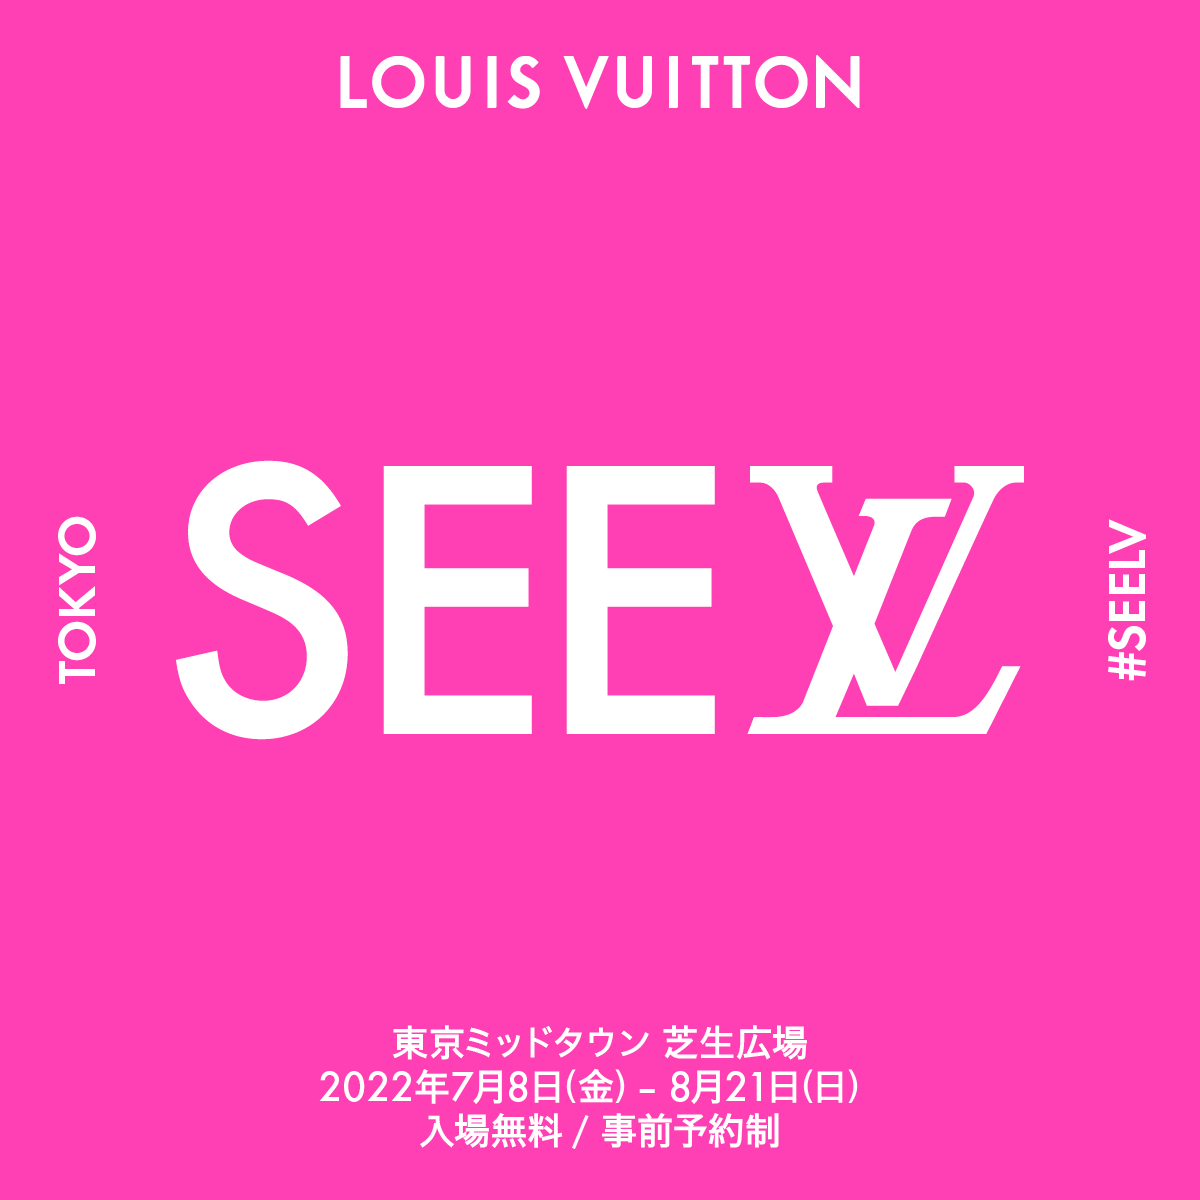 Images [Closed]「SEE LV」展